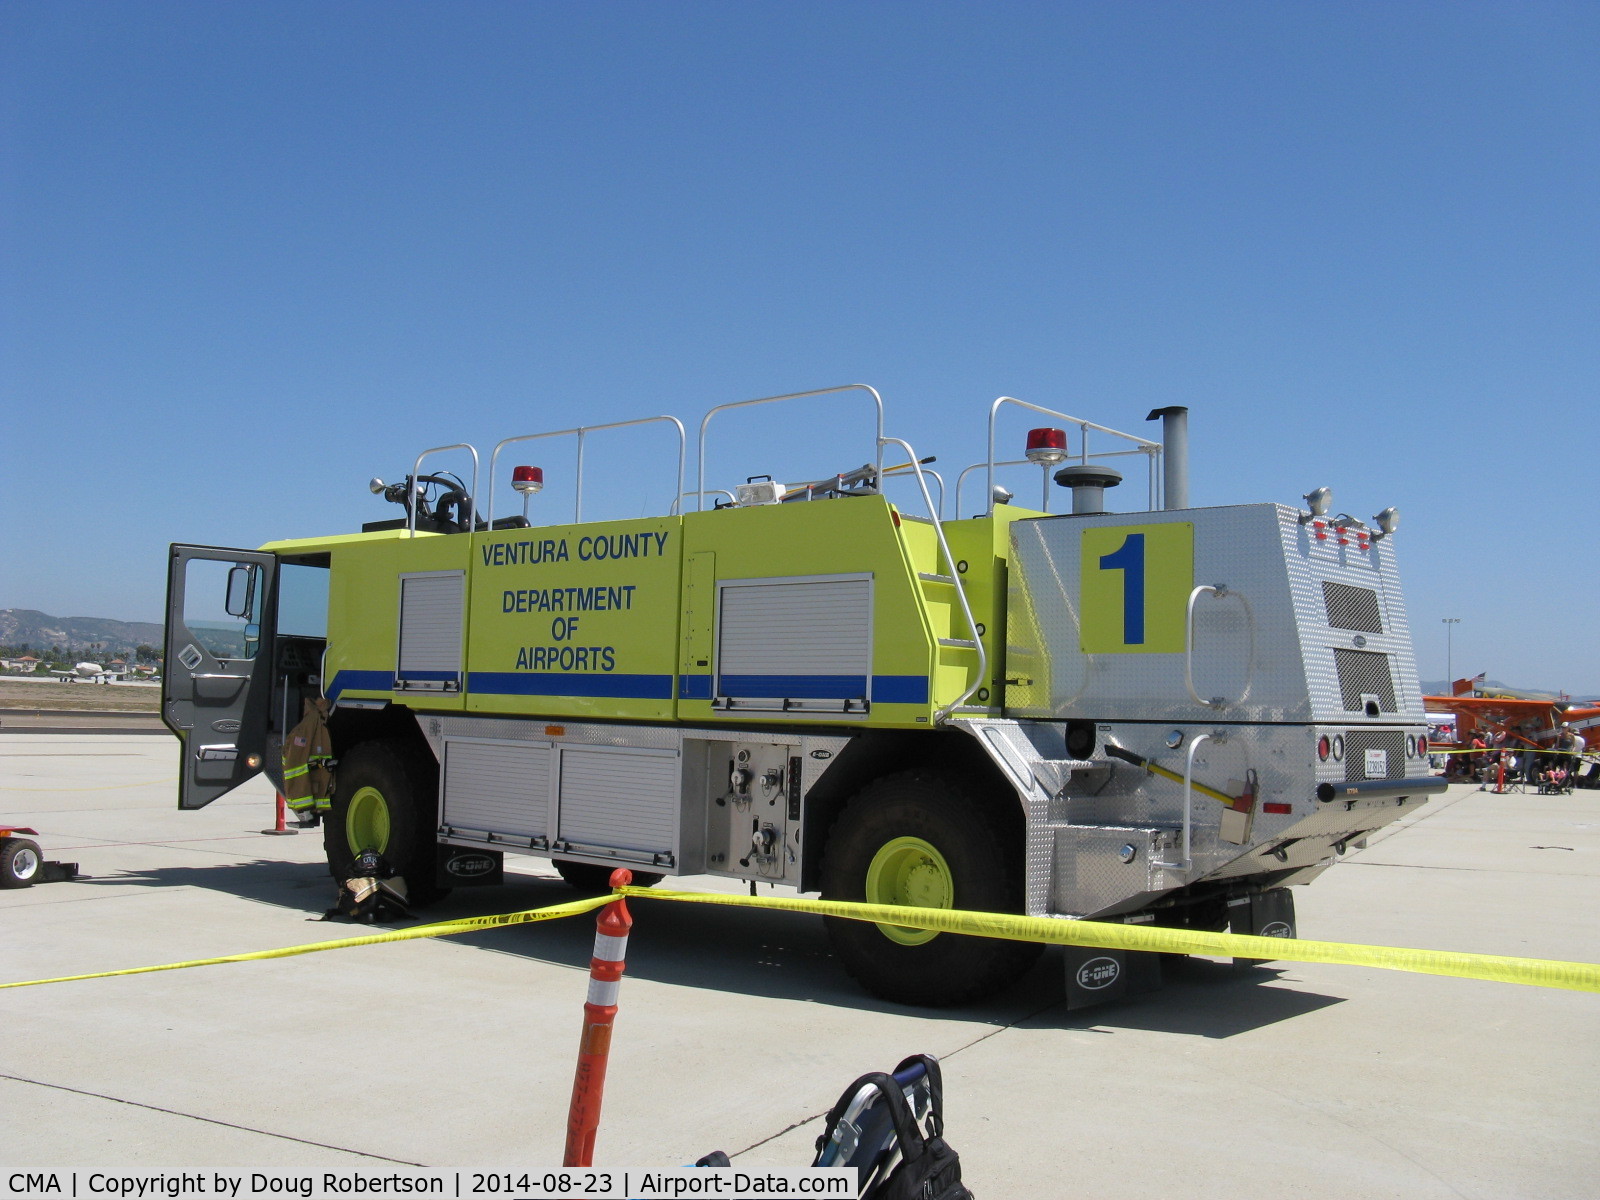 Camarillo Airport (CMA) - Ventura County Fire Department of Airports vehicle based at CMA Fire Station